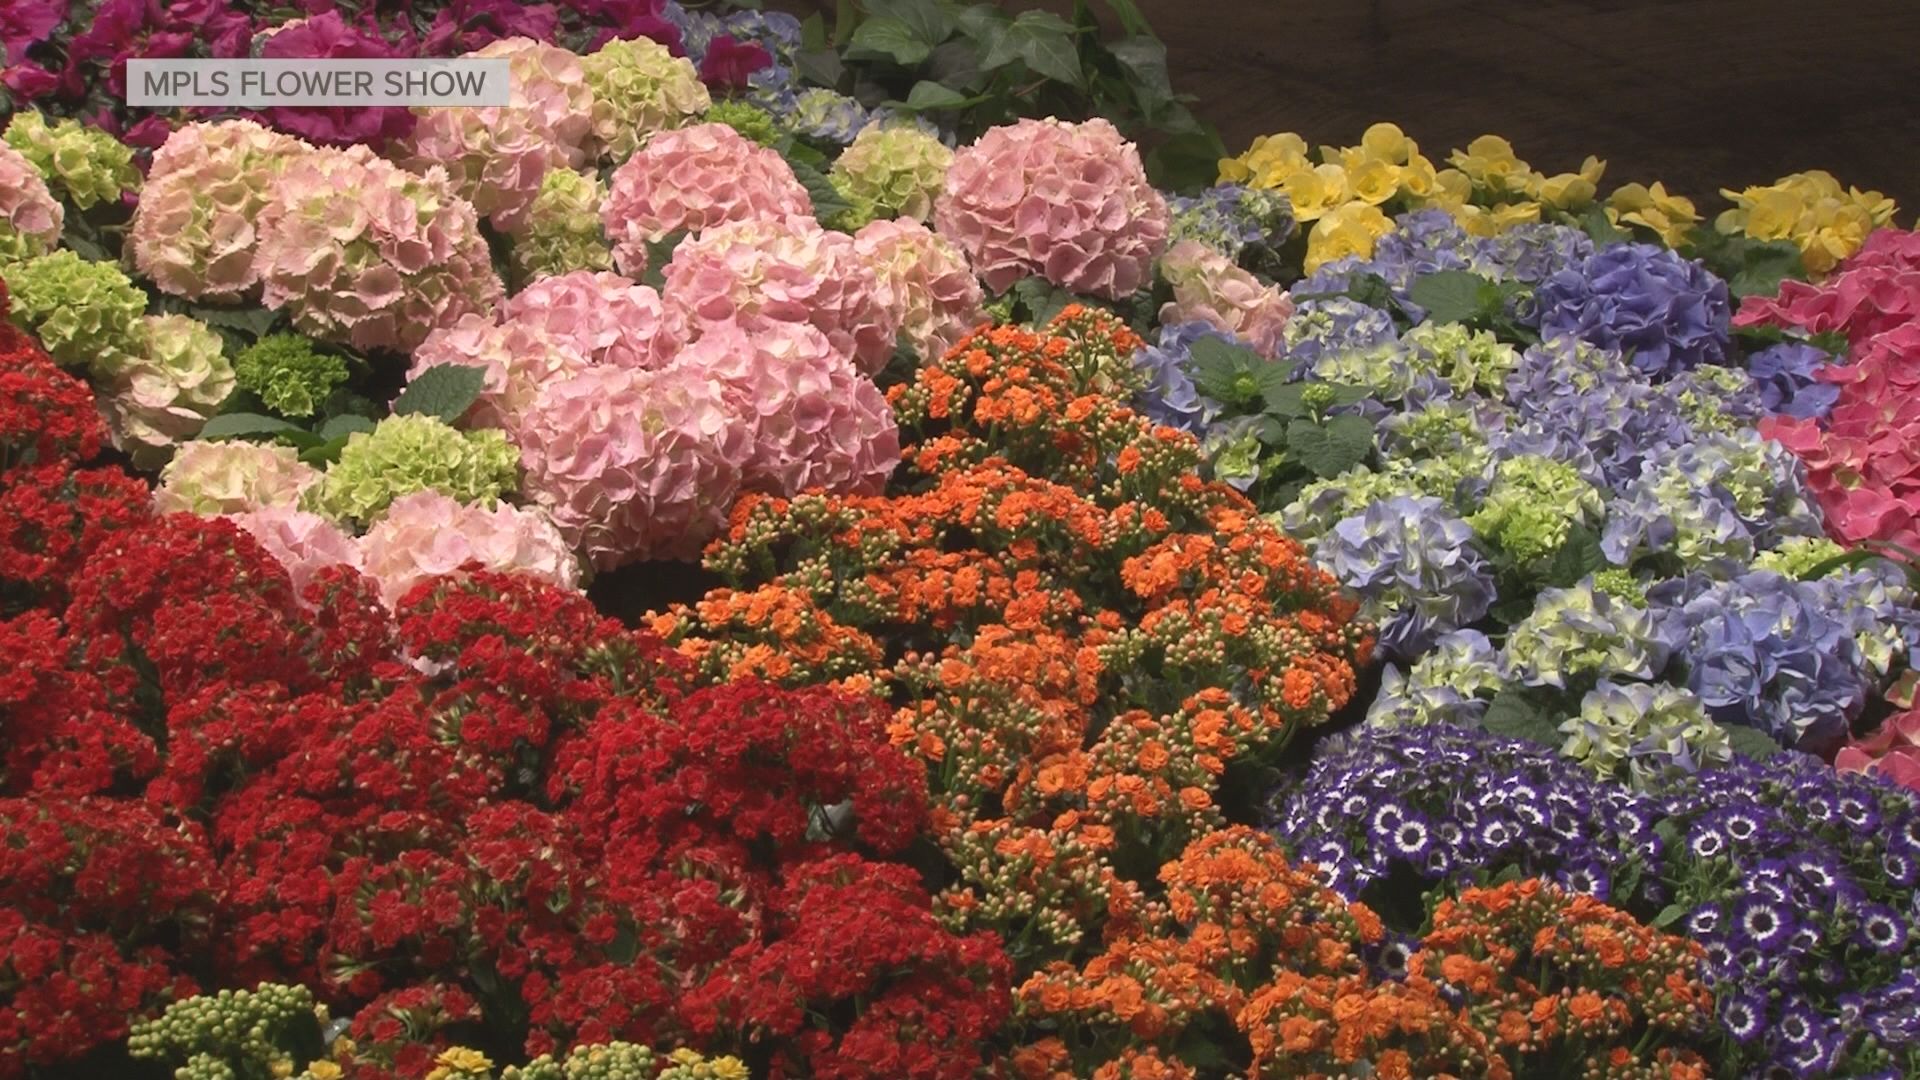 Grow with KARE Bachman's spring flower show